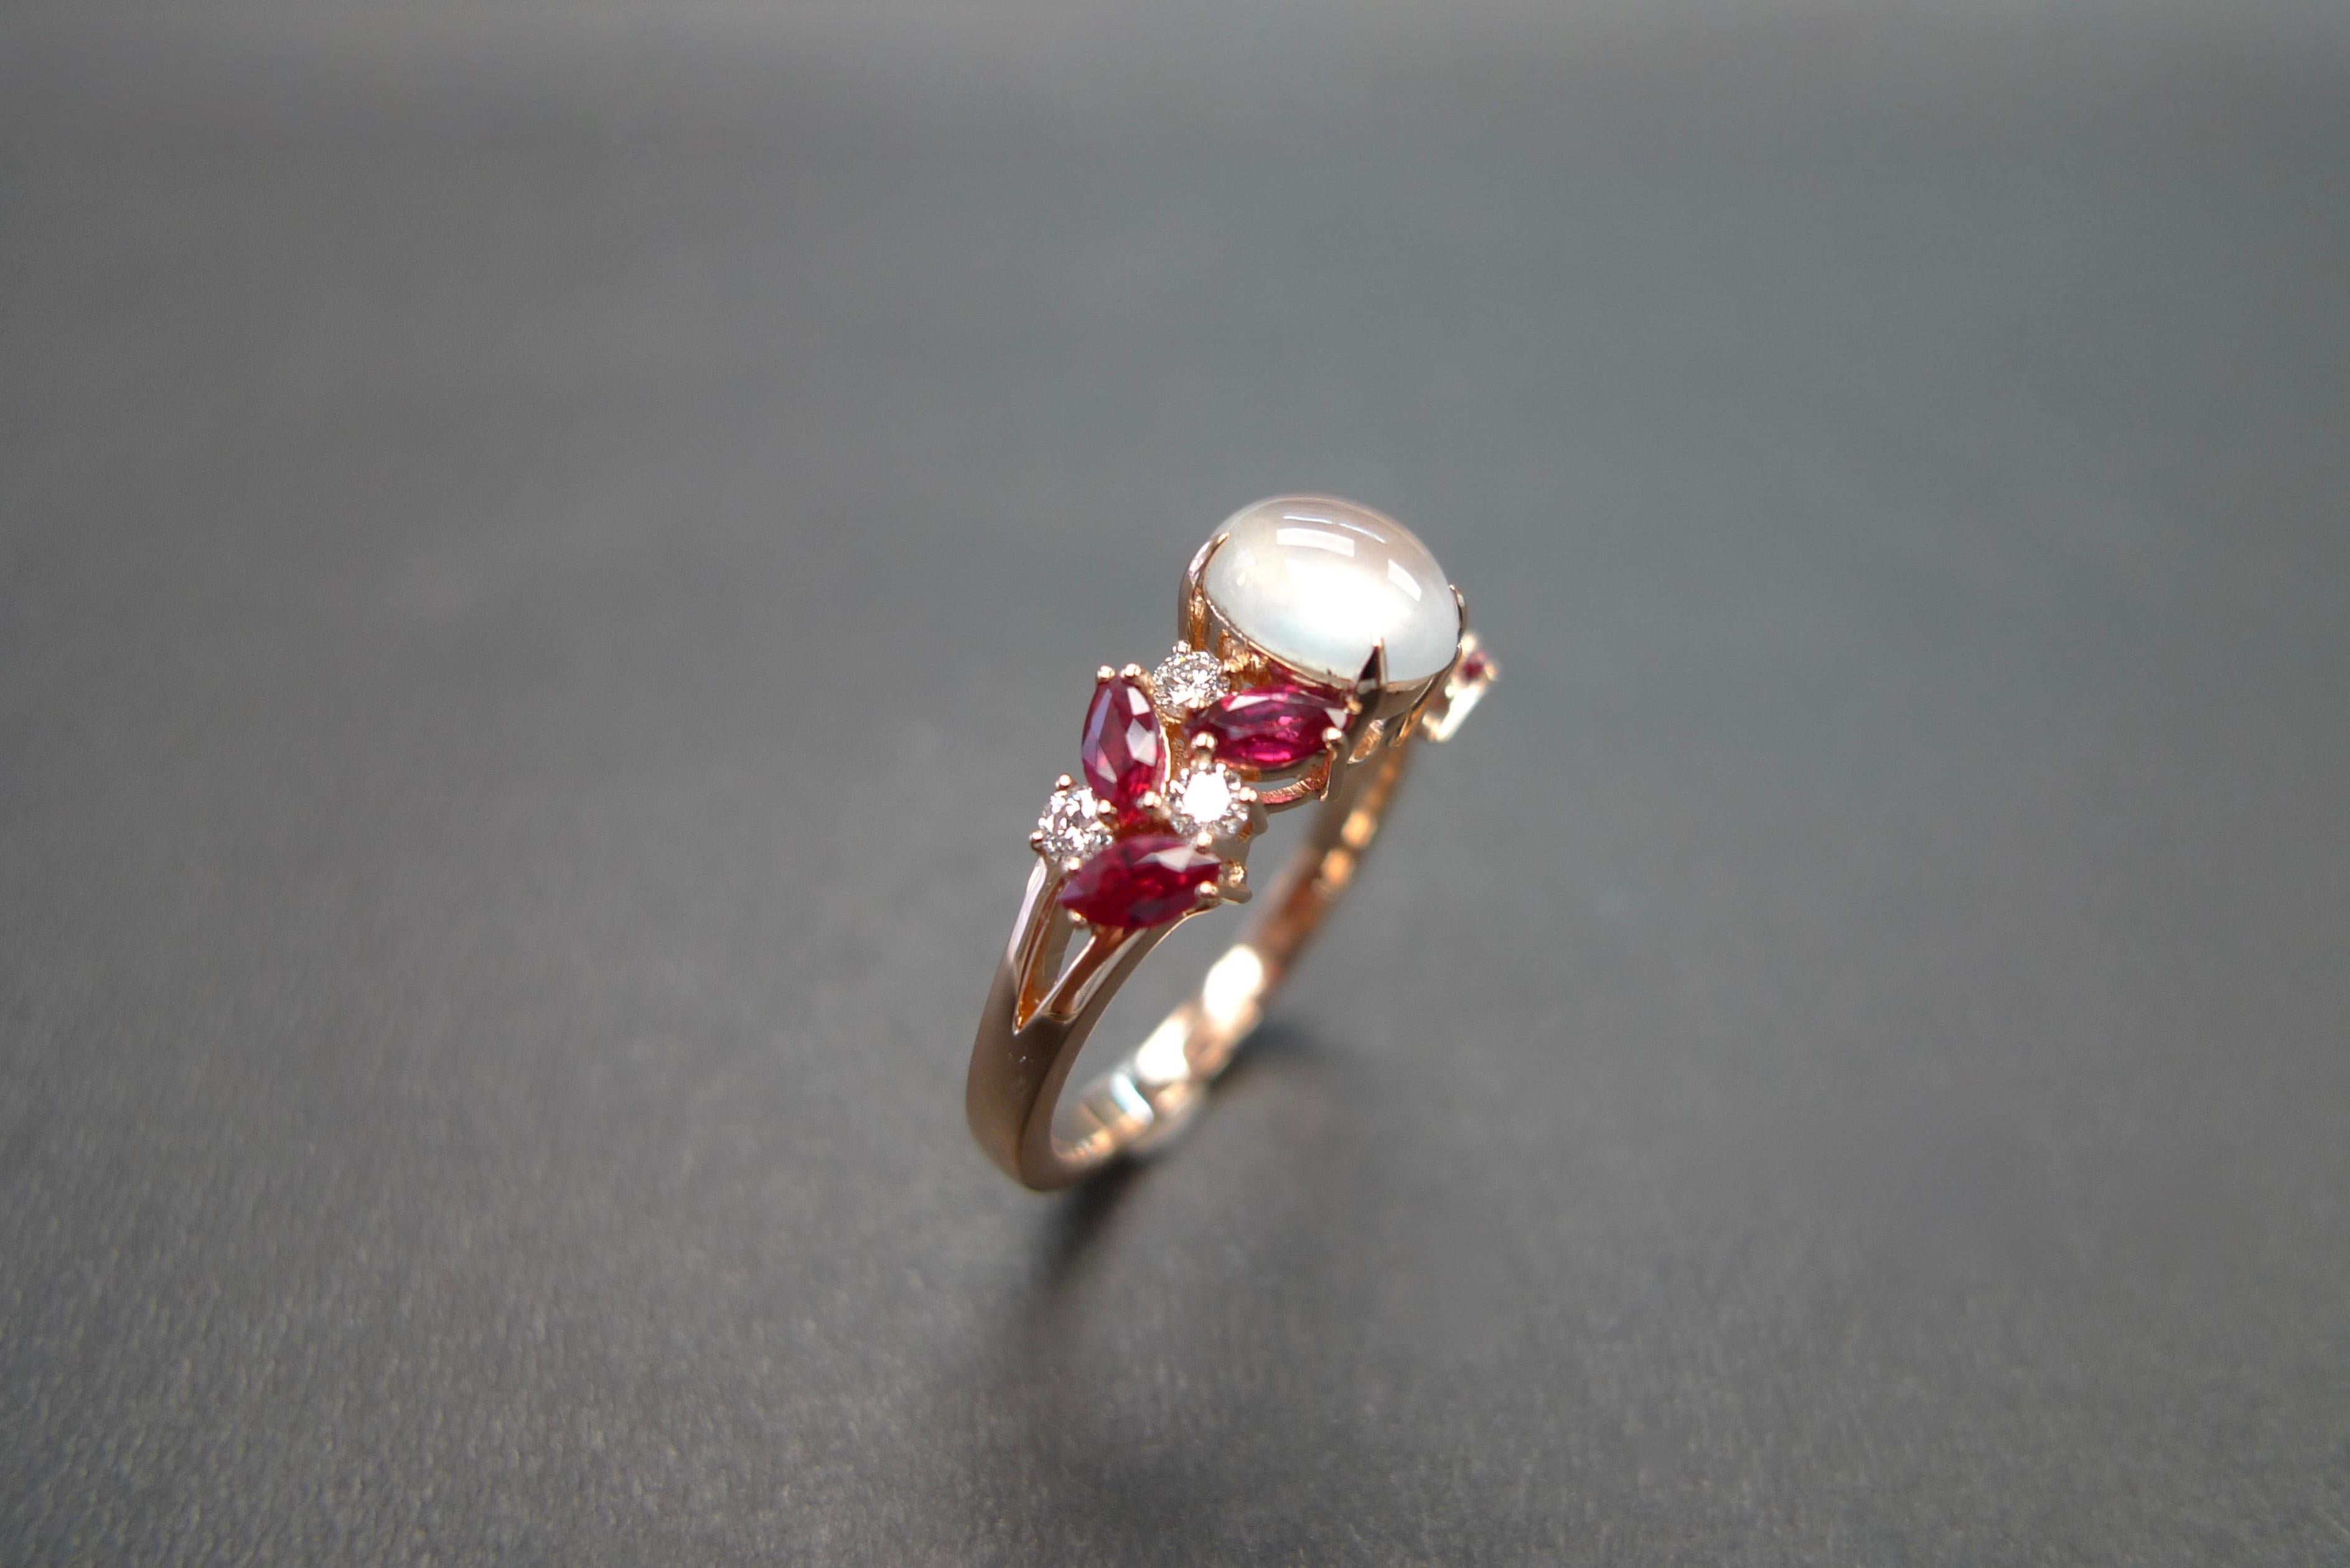 For Sale:  Rose Gold Engagement Ring Set with White Jade, Marquise Rubies and Diamond 10